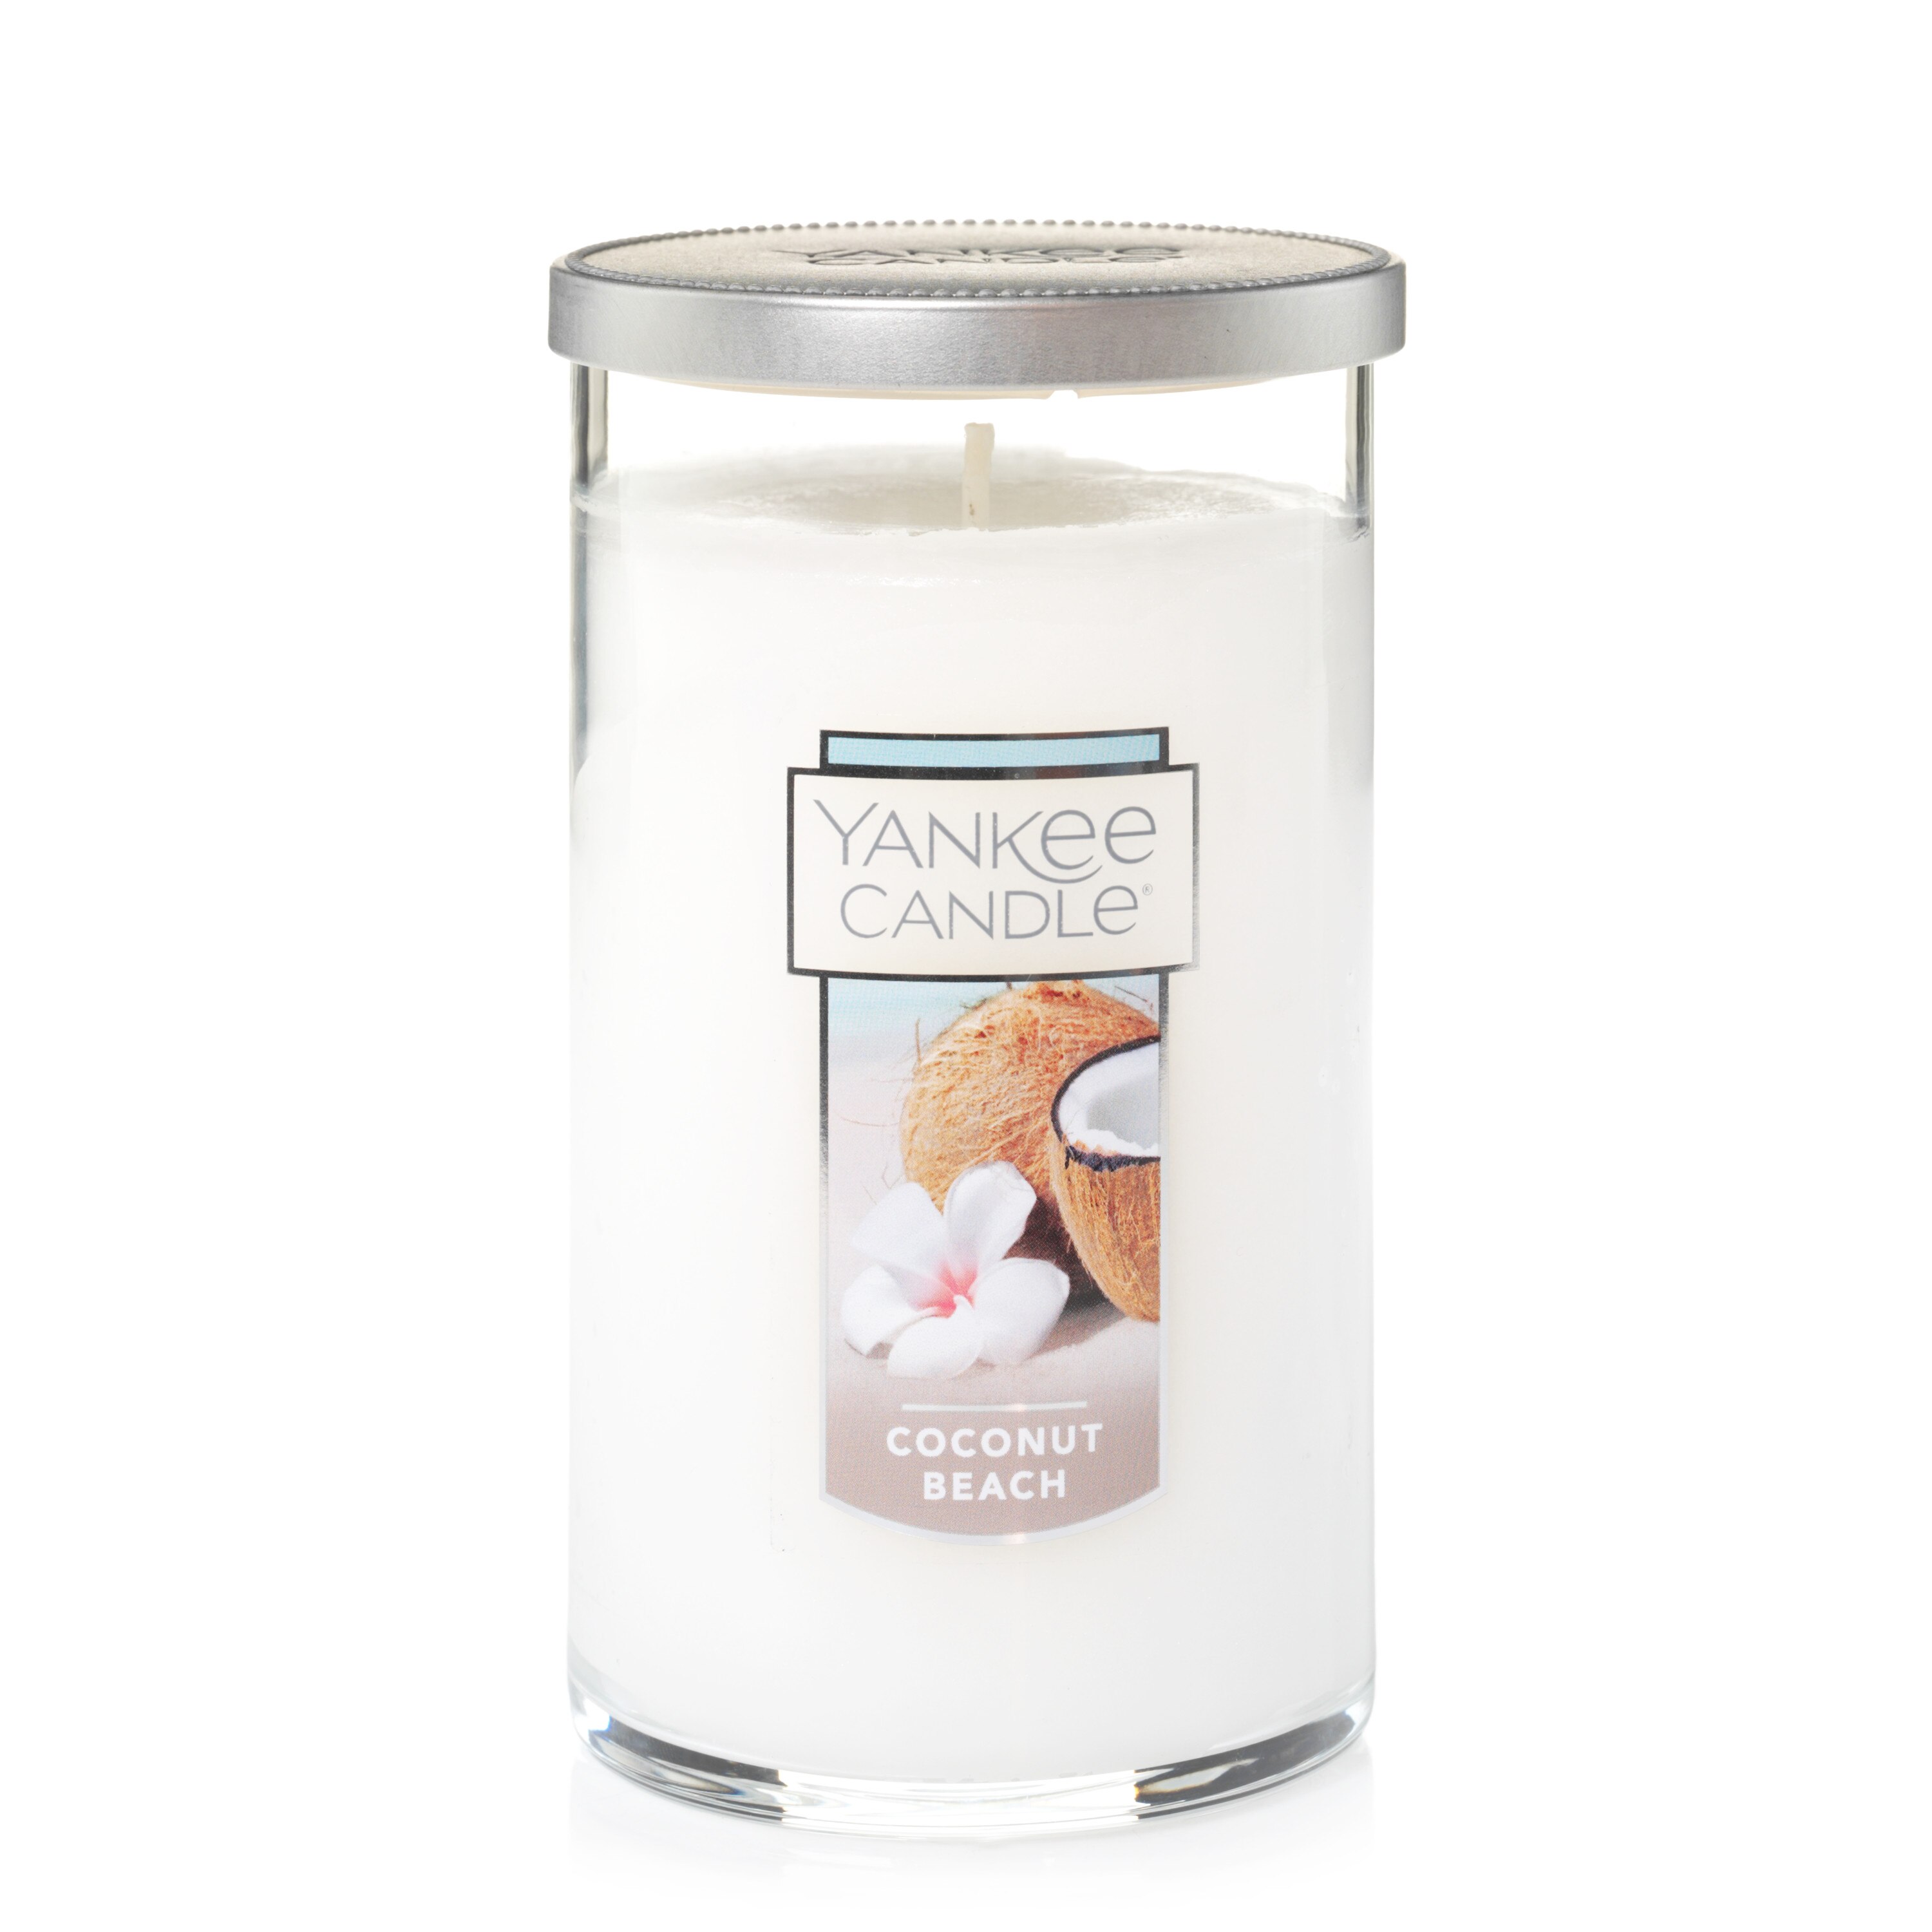 Yankee Candle Coconut Beach Perfect Pillar Candle, 12 OZ